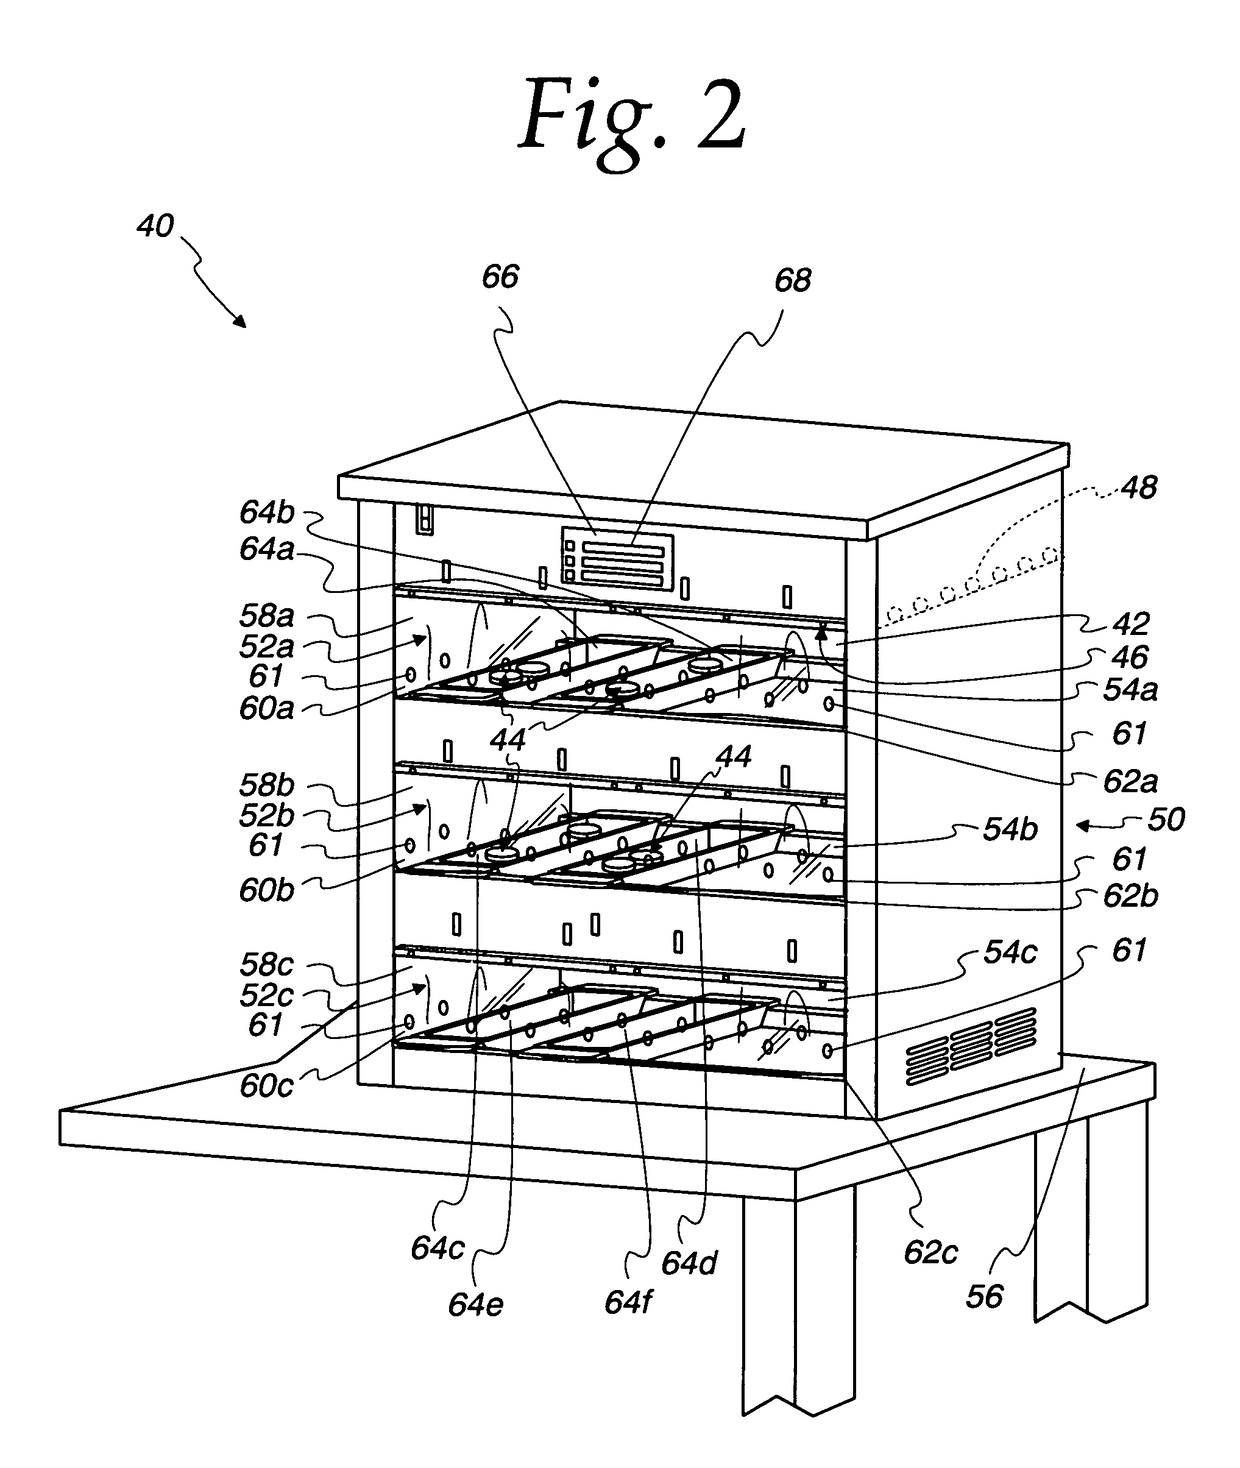 Food staging device, method of storing foods, and method of making a sandwich